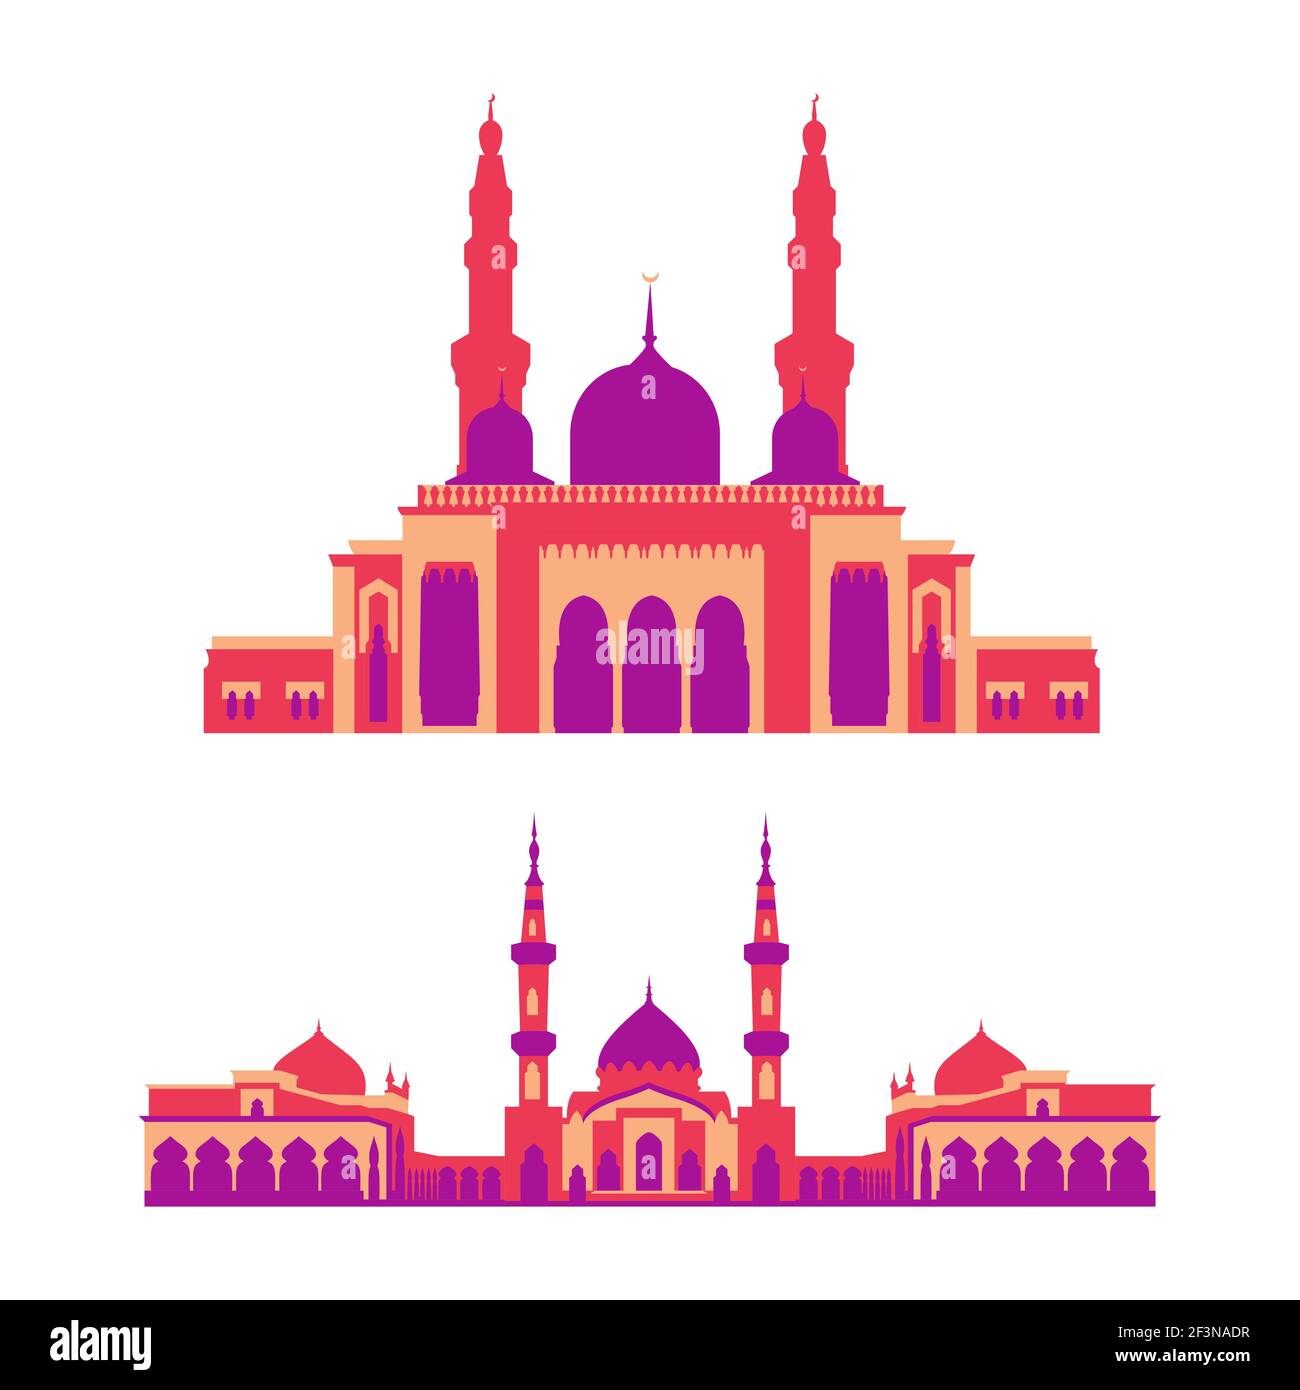 Simple flat style illustration. vector of a mosque collection set illustration. illustration of Ramadan Kareem Stock Vector